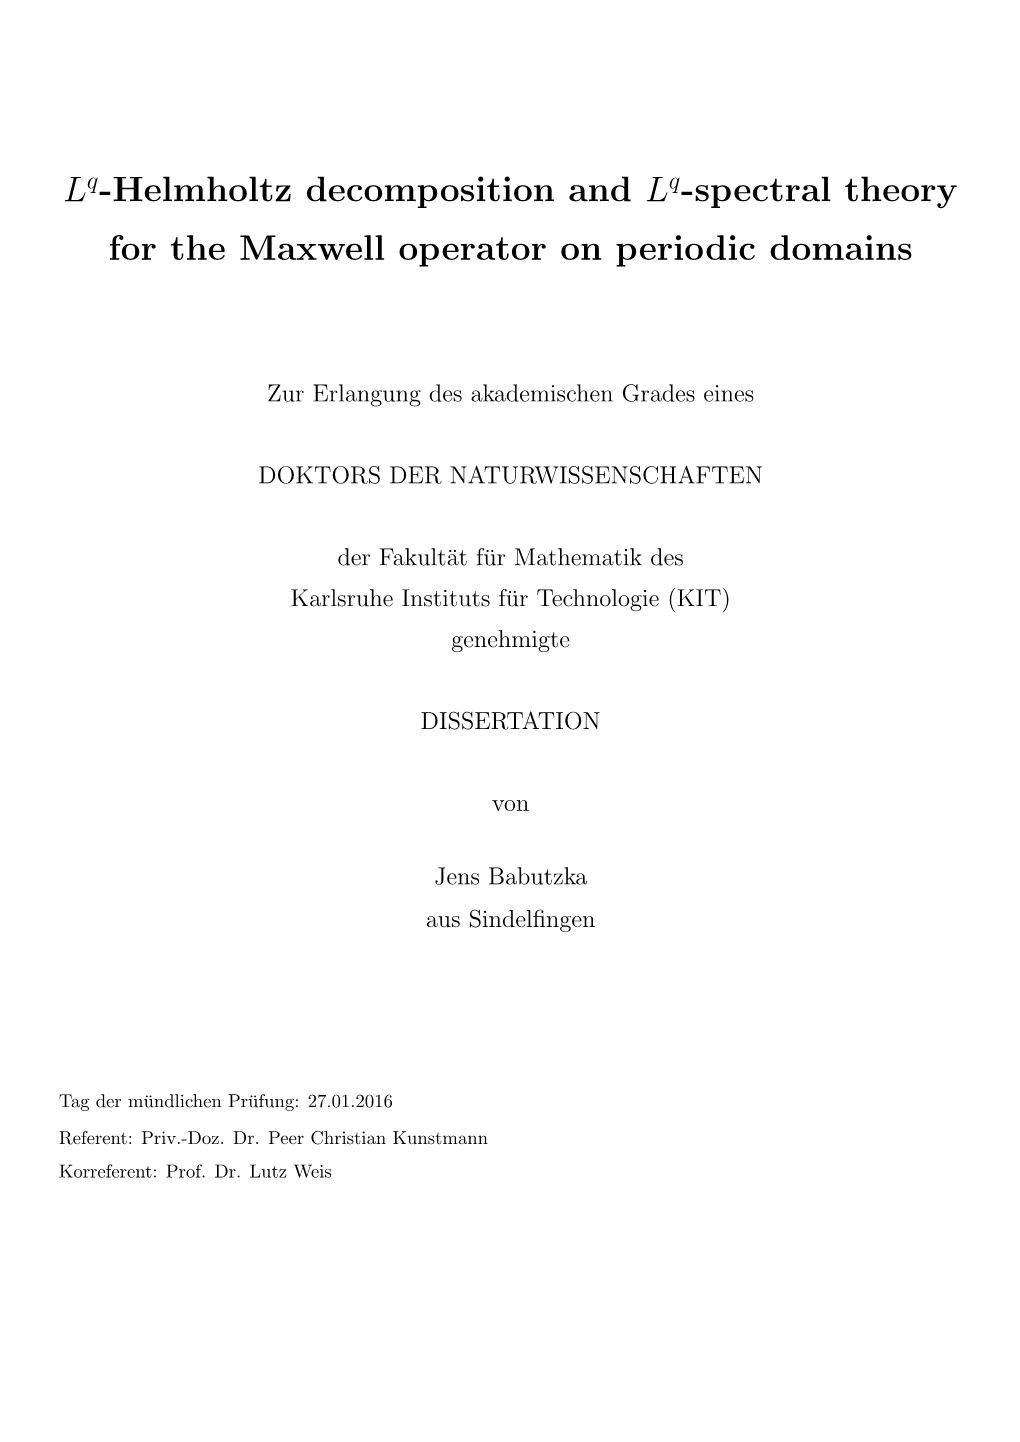 Lq-Helmholtz Decomposition and Lq-Spectral Theory for the Maxwell Operator on Periodic Domains